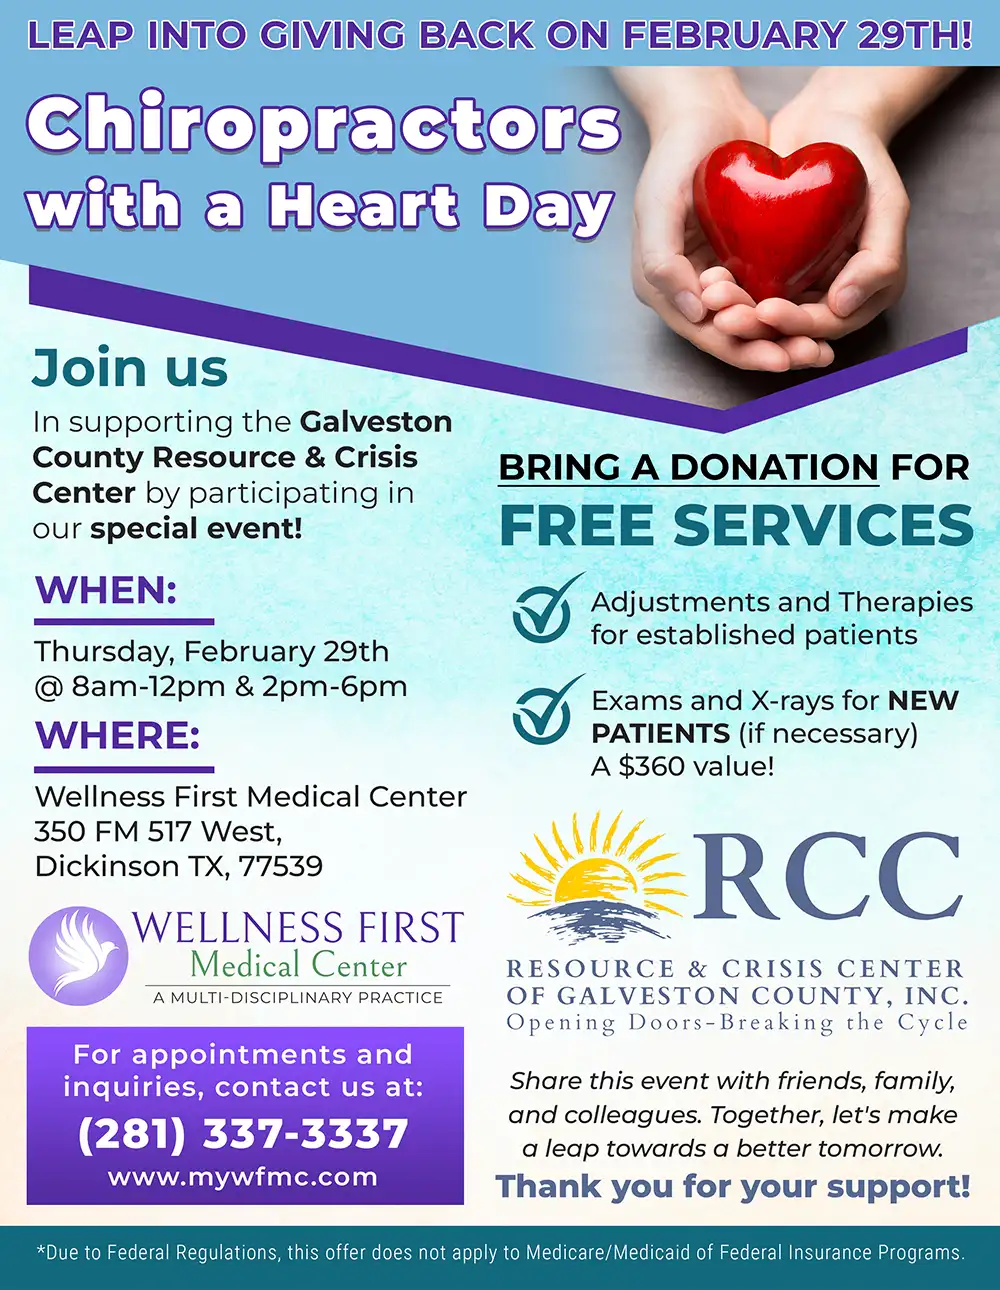 Chiropractors with a Heart Day!